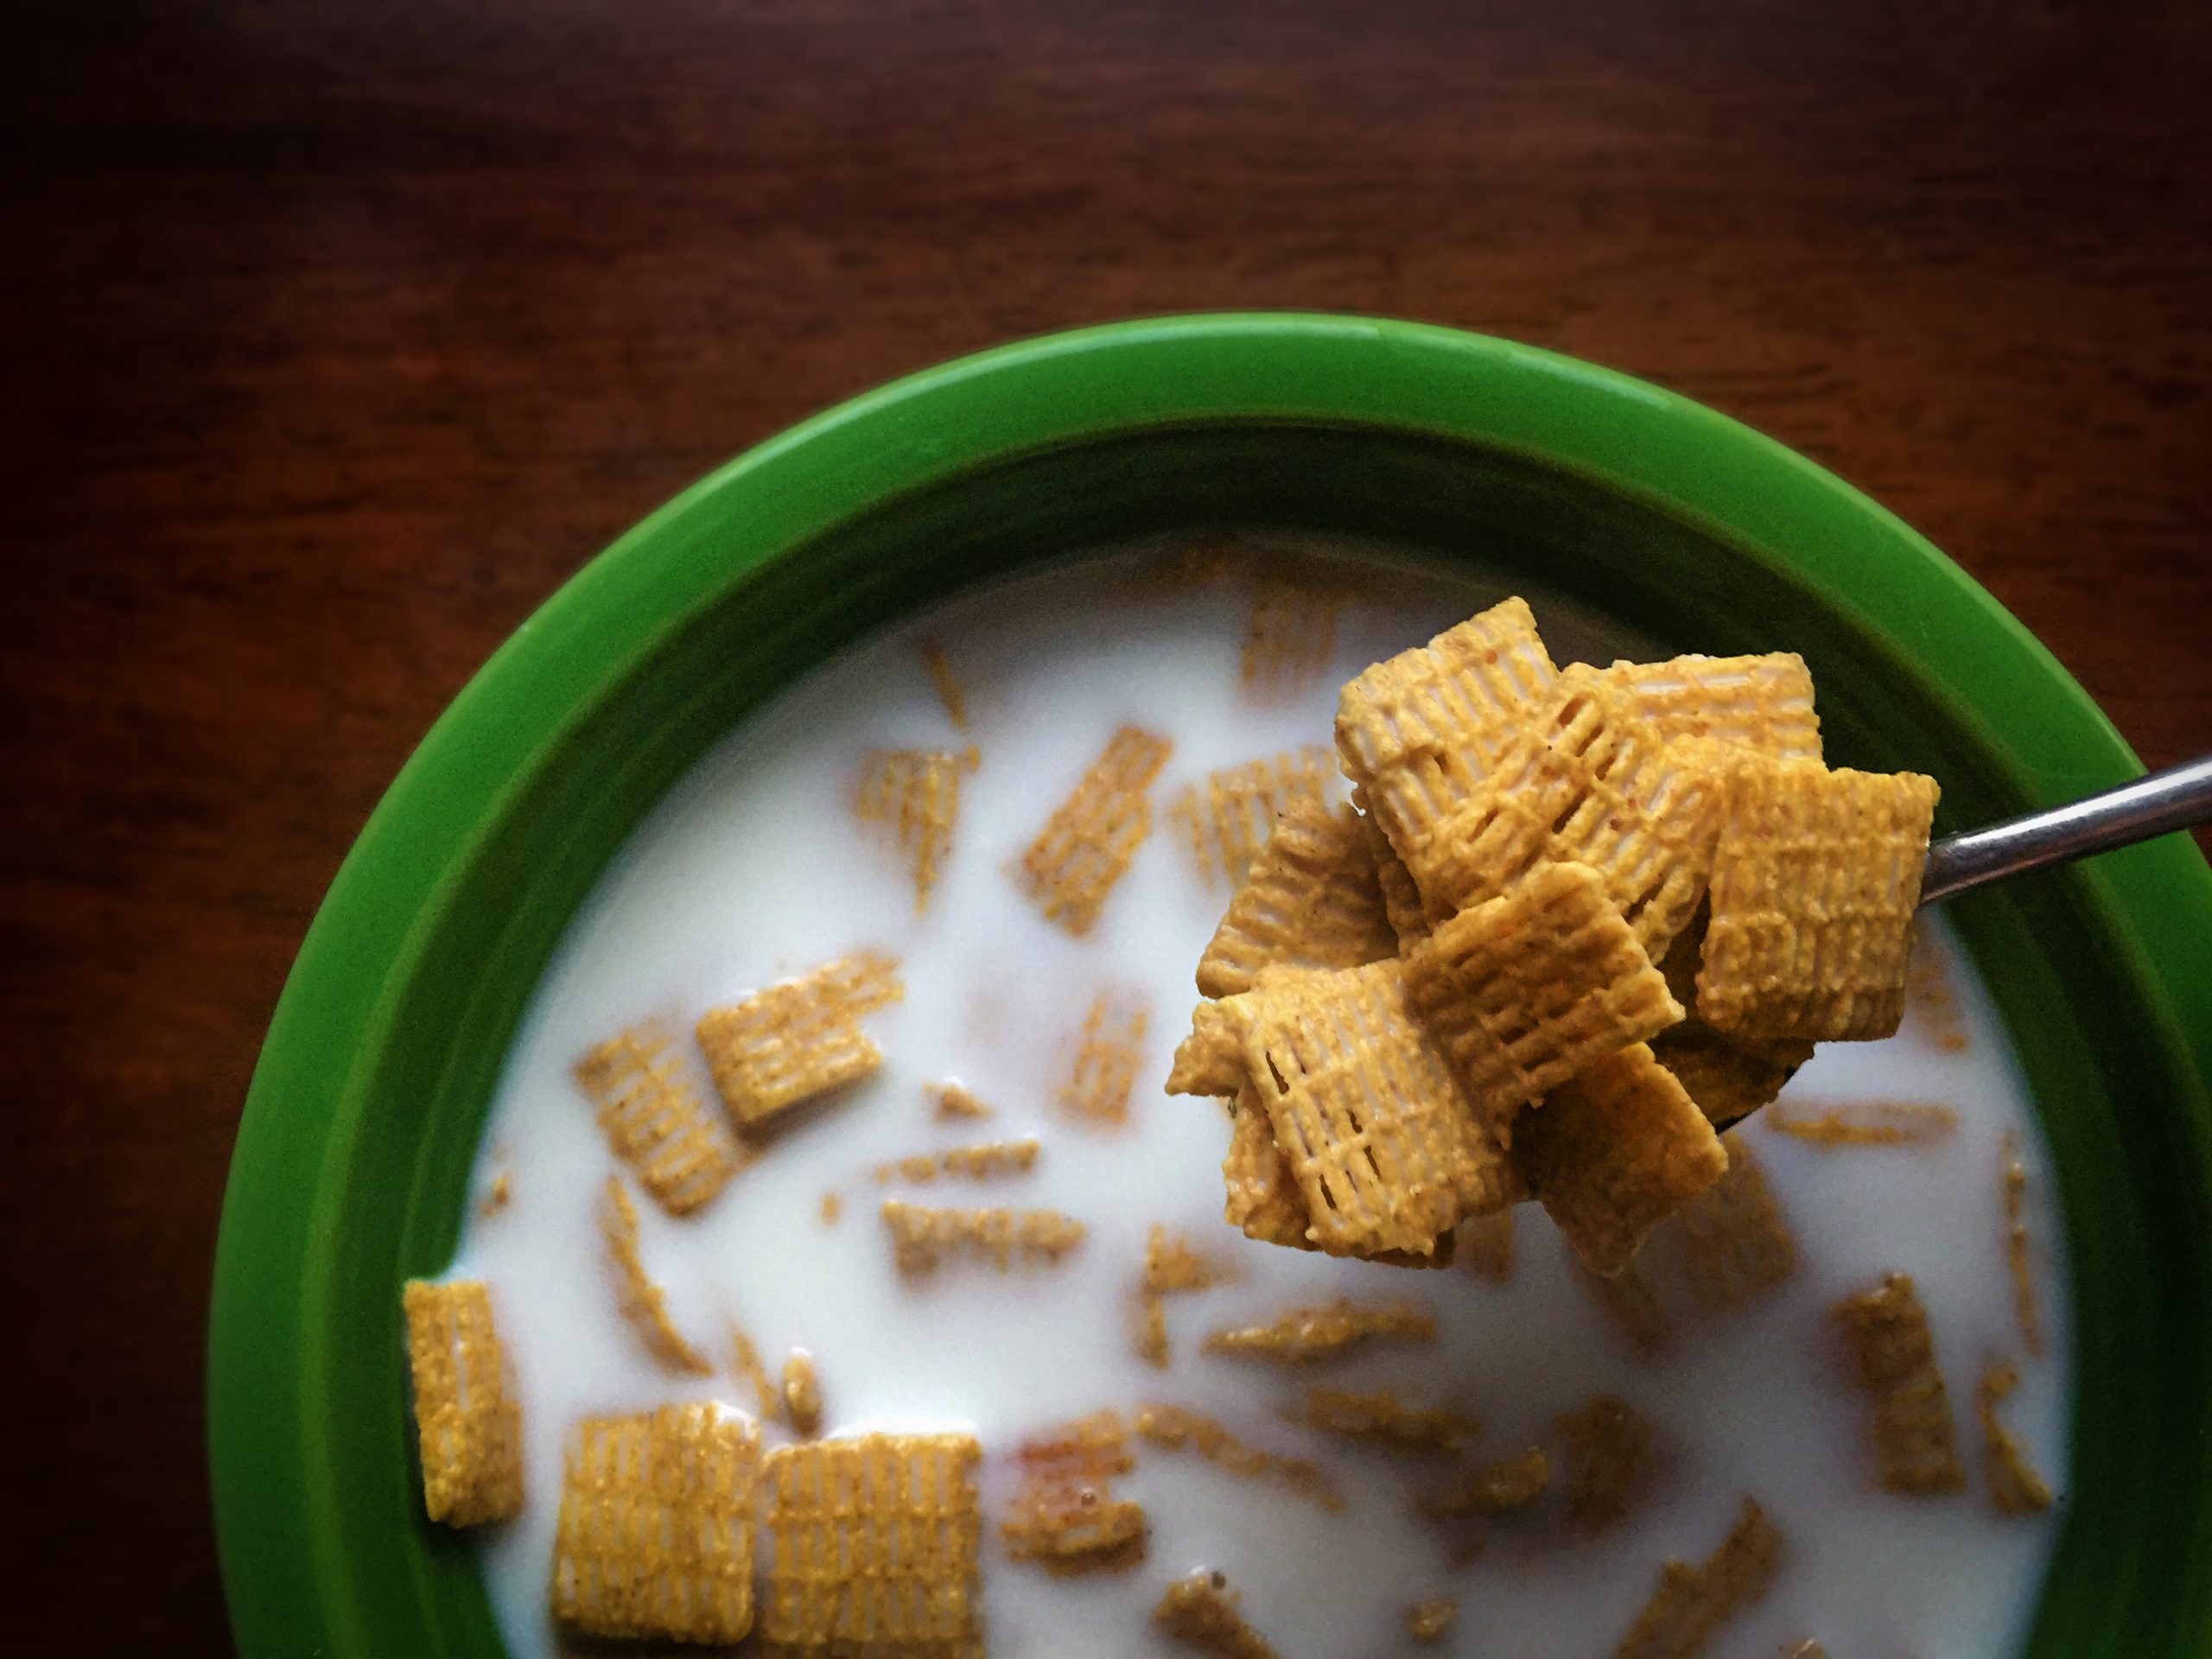 Breakfast snacks help kids living in poverty start their day right.